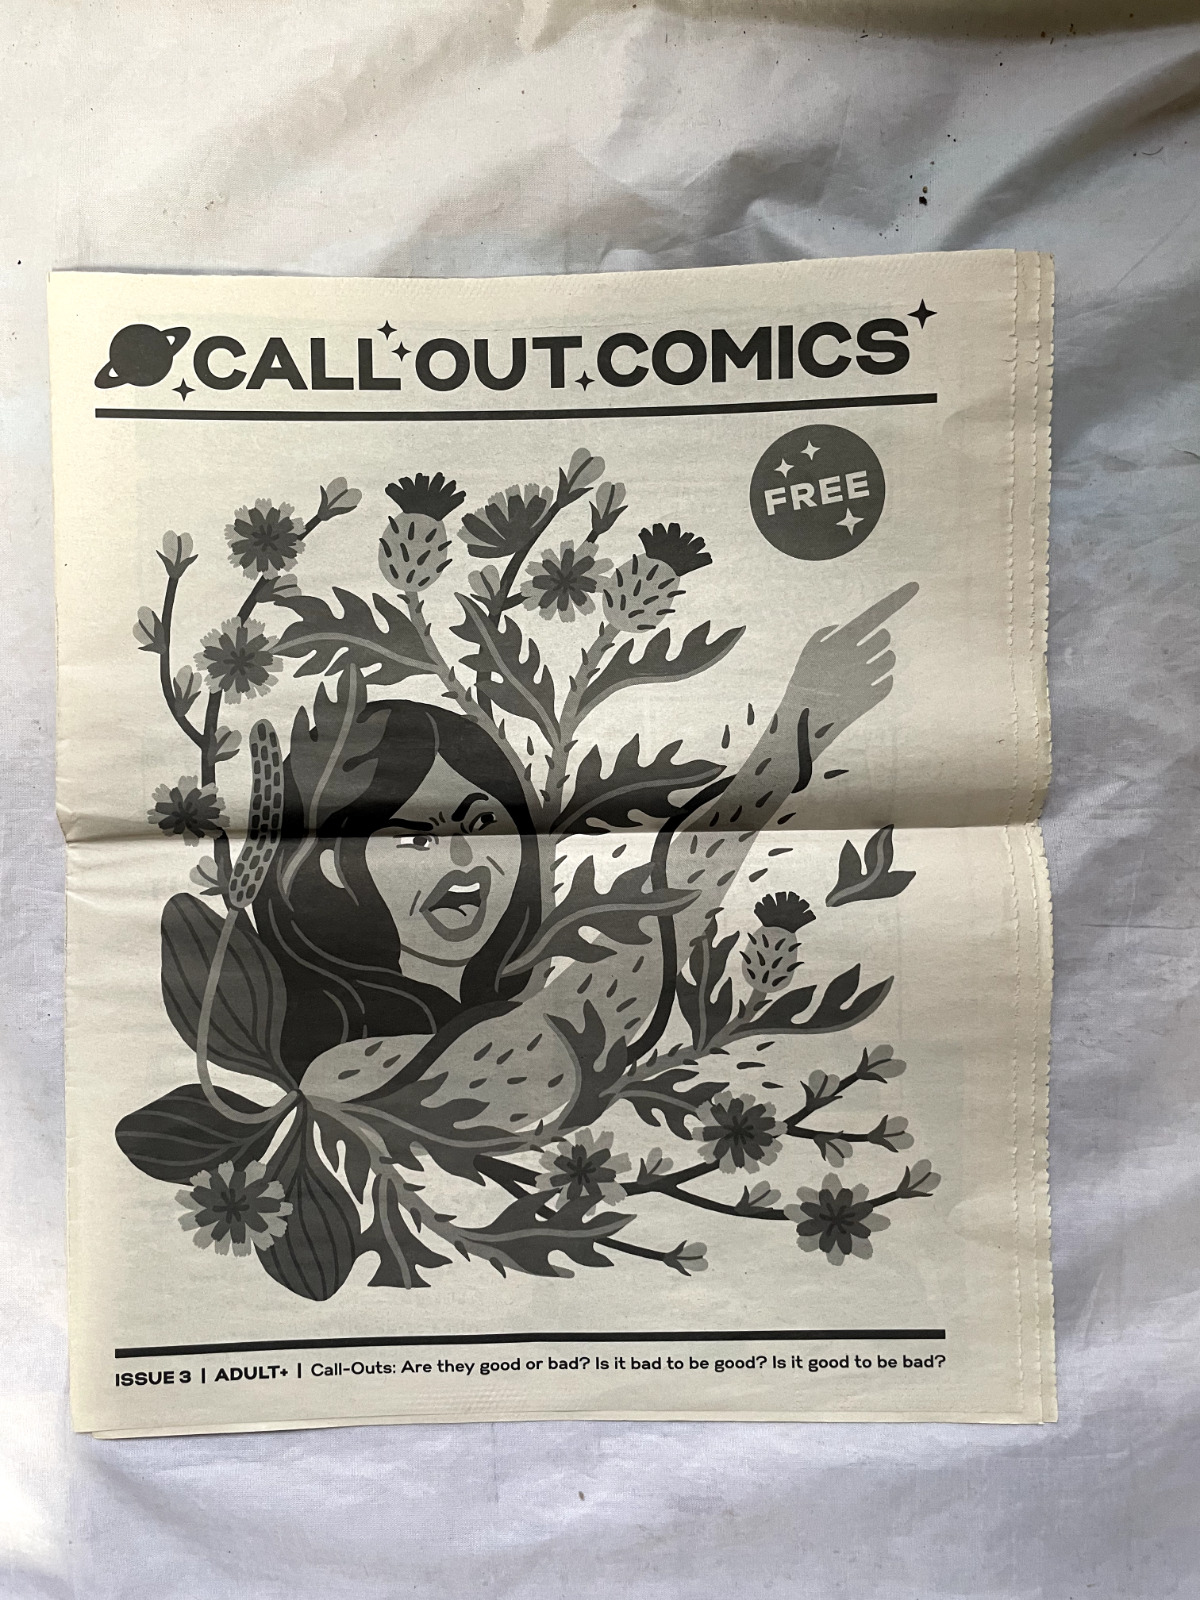 Call Out Comics 2018 Issue 3 Paper Comic